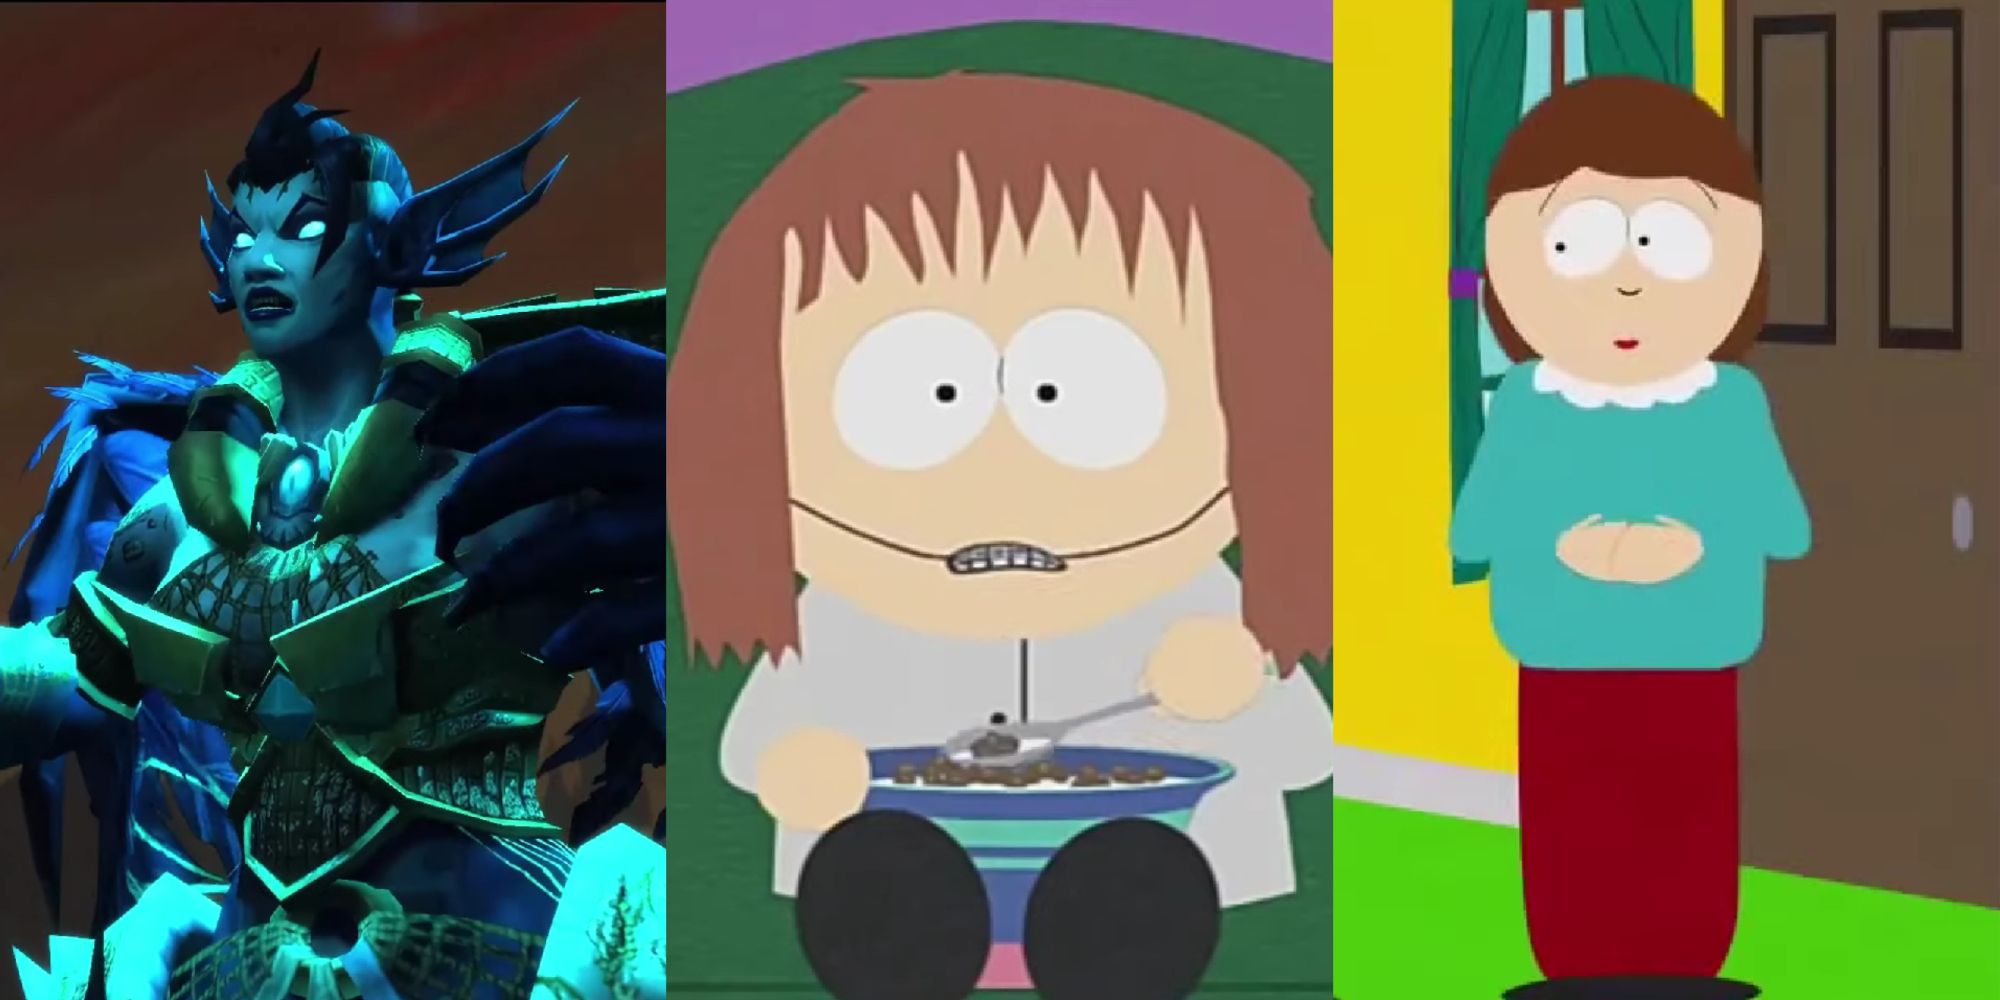 Split images of April Stewart as Helya in World of Warcraft, Shelly Marsh in South Park, and Cartman's mom in South Park.